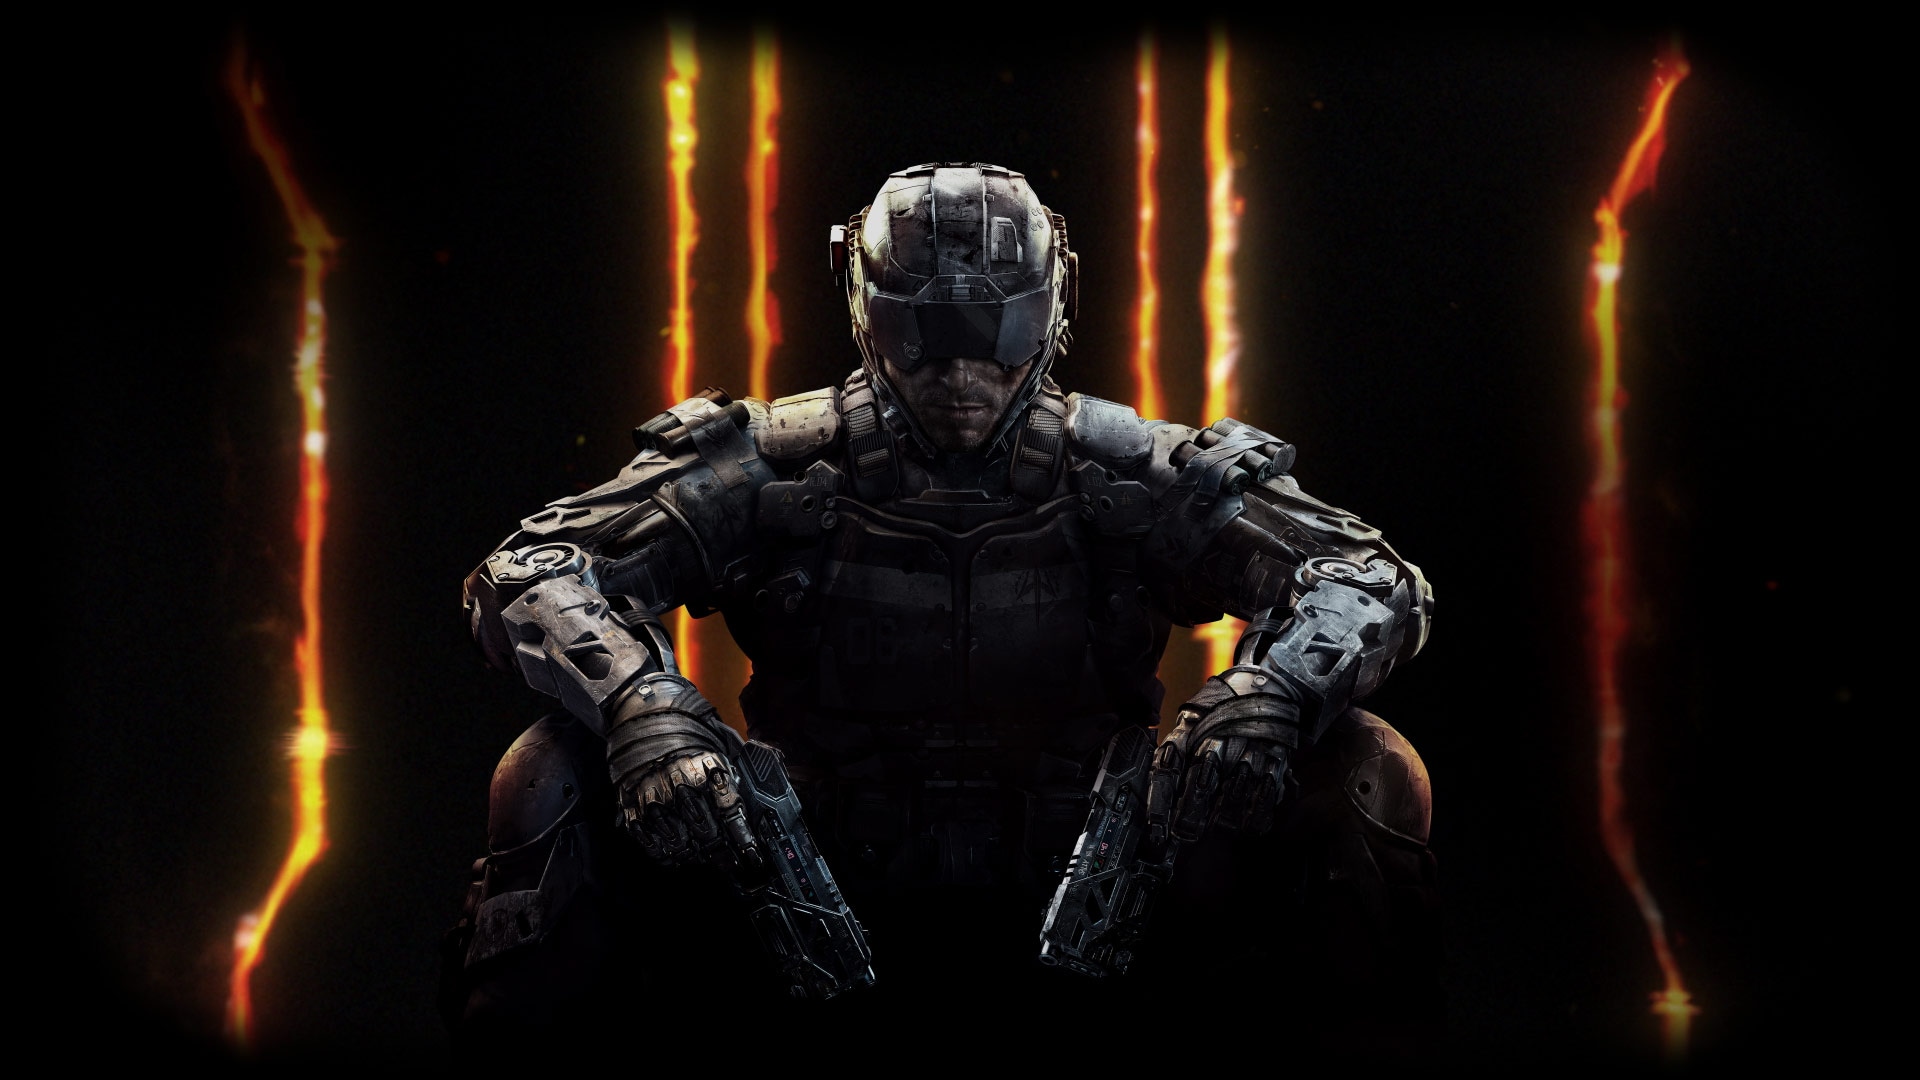 Call of Duty: Black Ops III Wallpapers, Pictures, Images